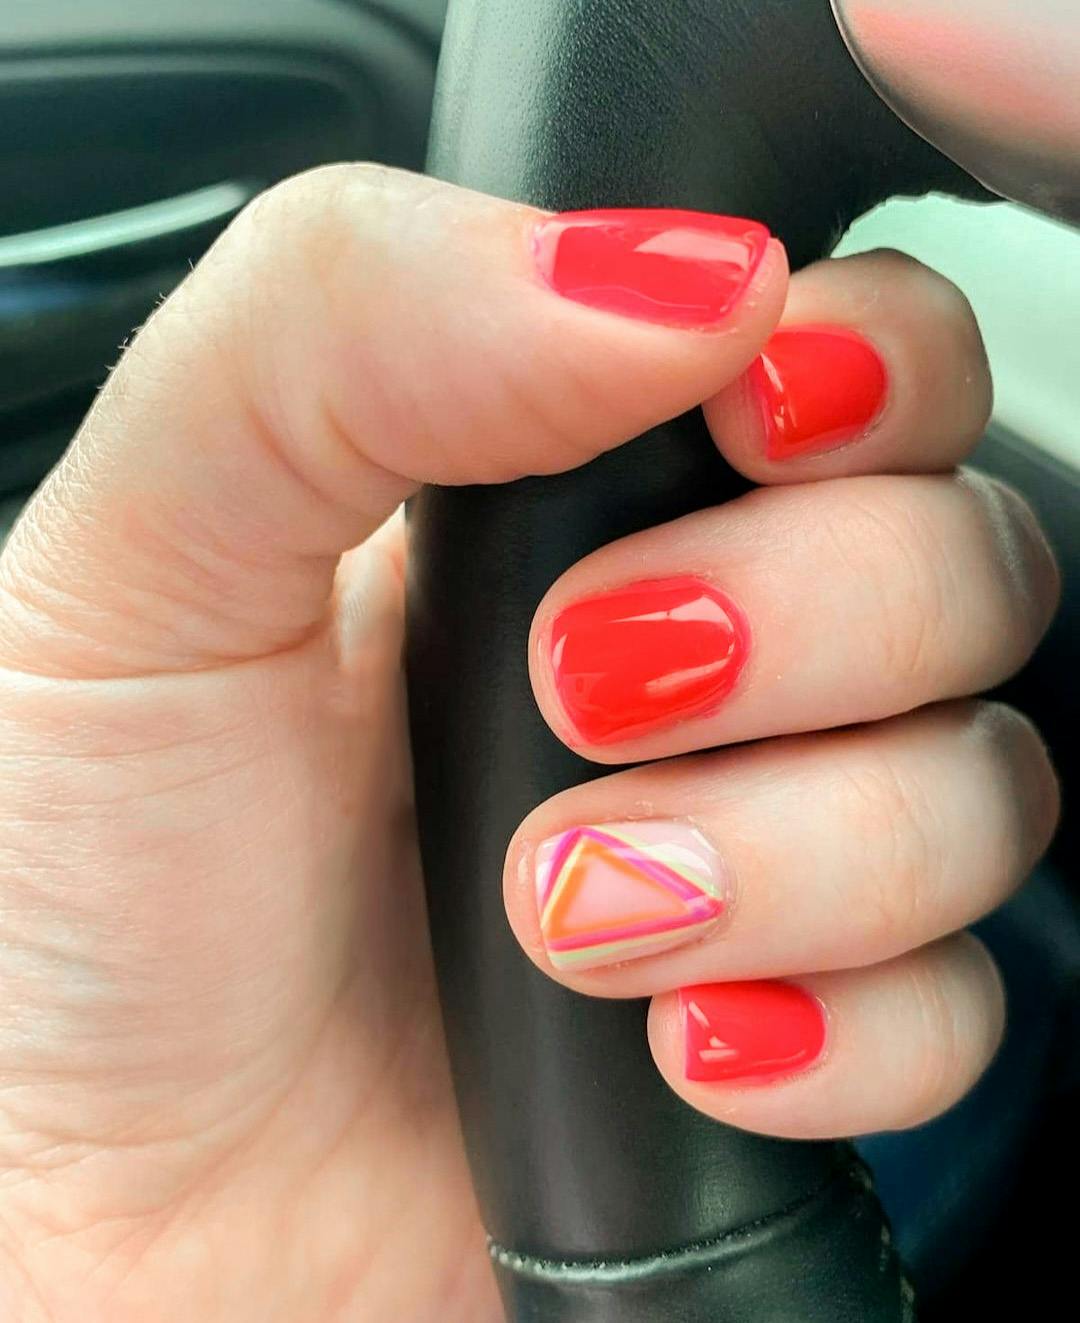 Hands painted red with triangle pattern on one nail